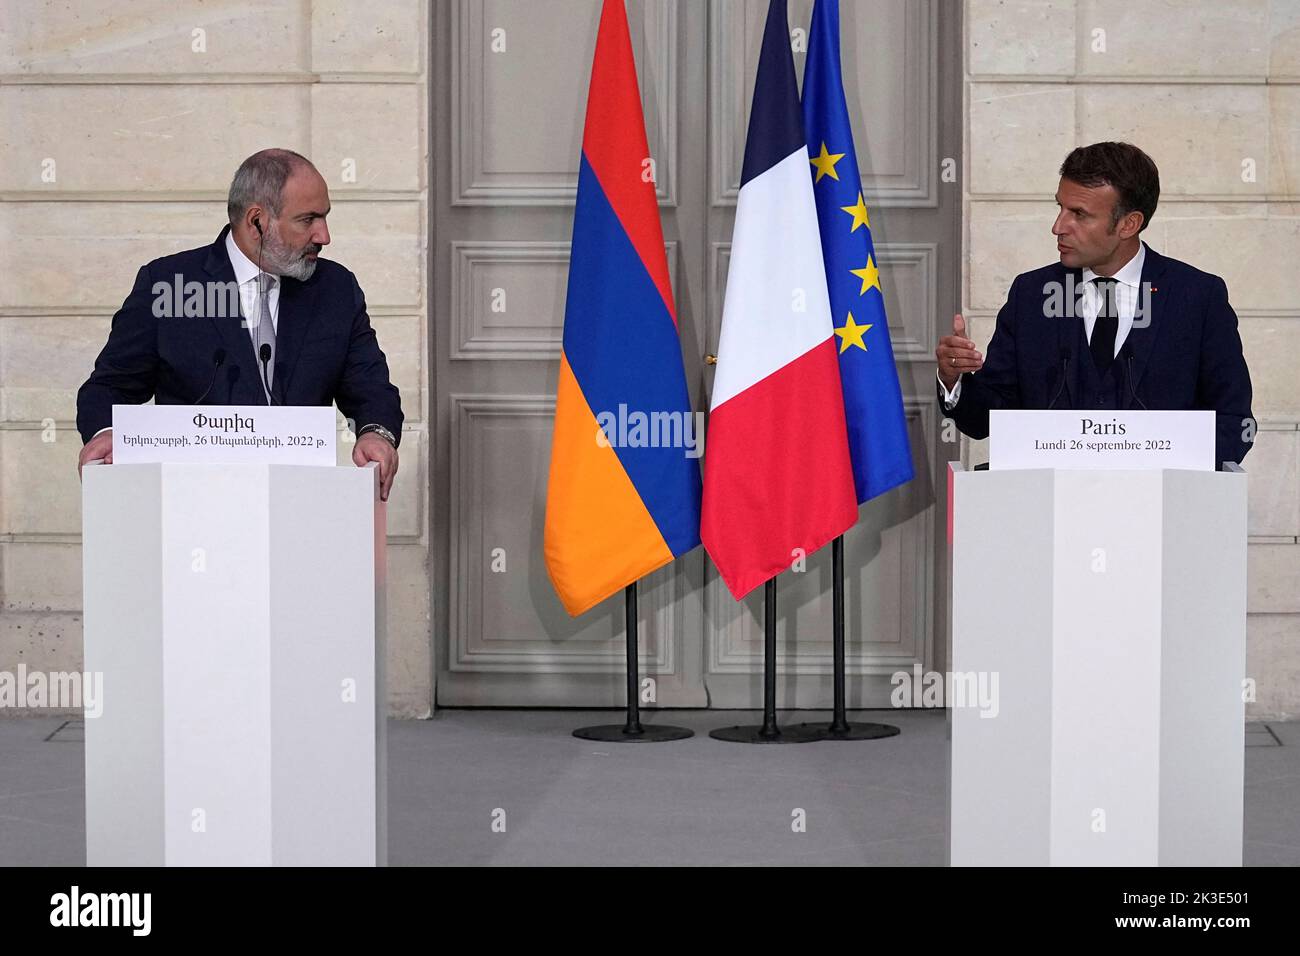 French President Emmanuel Macron and Armenian Prime Minister Nikol Pashinyan attend a joint press conference Monday, Sept. 26, 2022 at the Elysee Palace in Paris, France.  Michel Euler/Pool via REUTERS Stock Photo